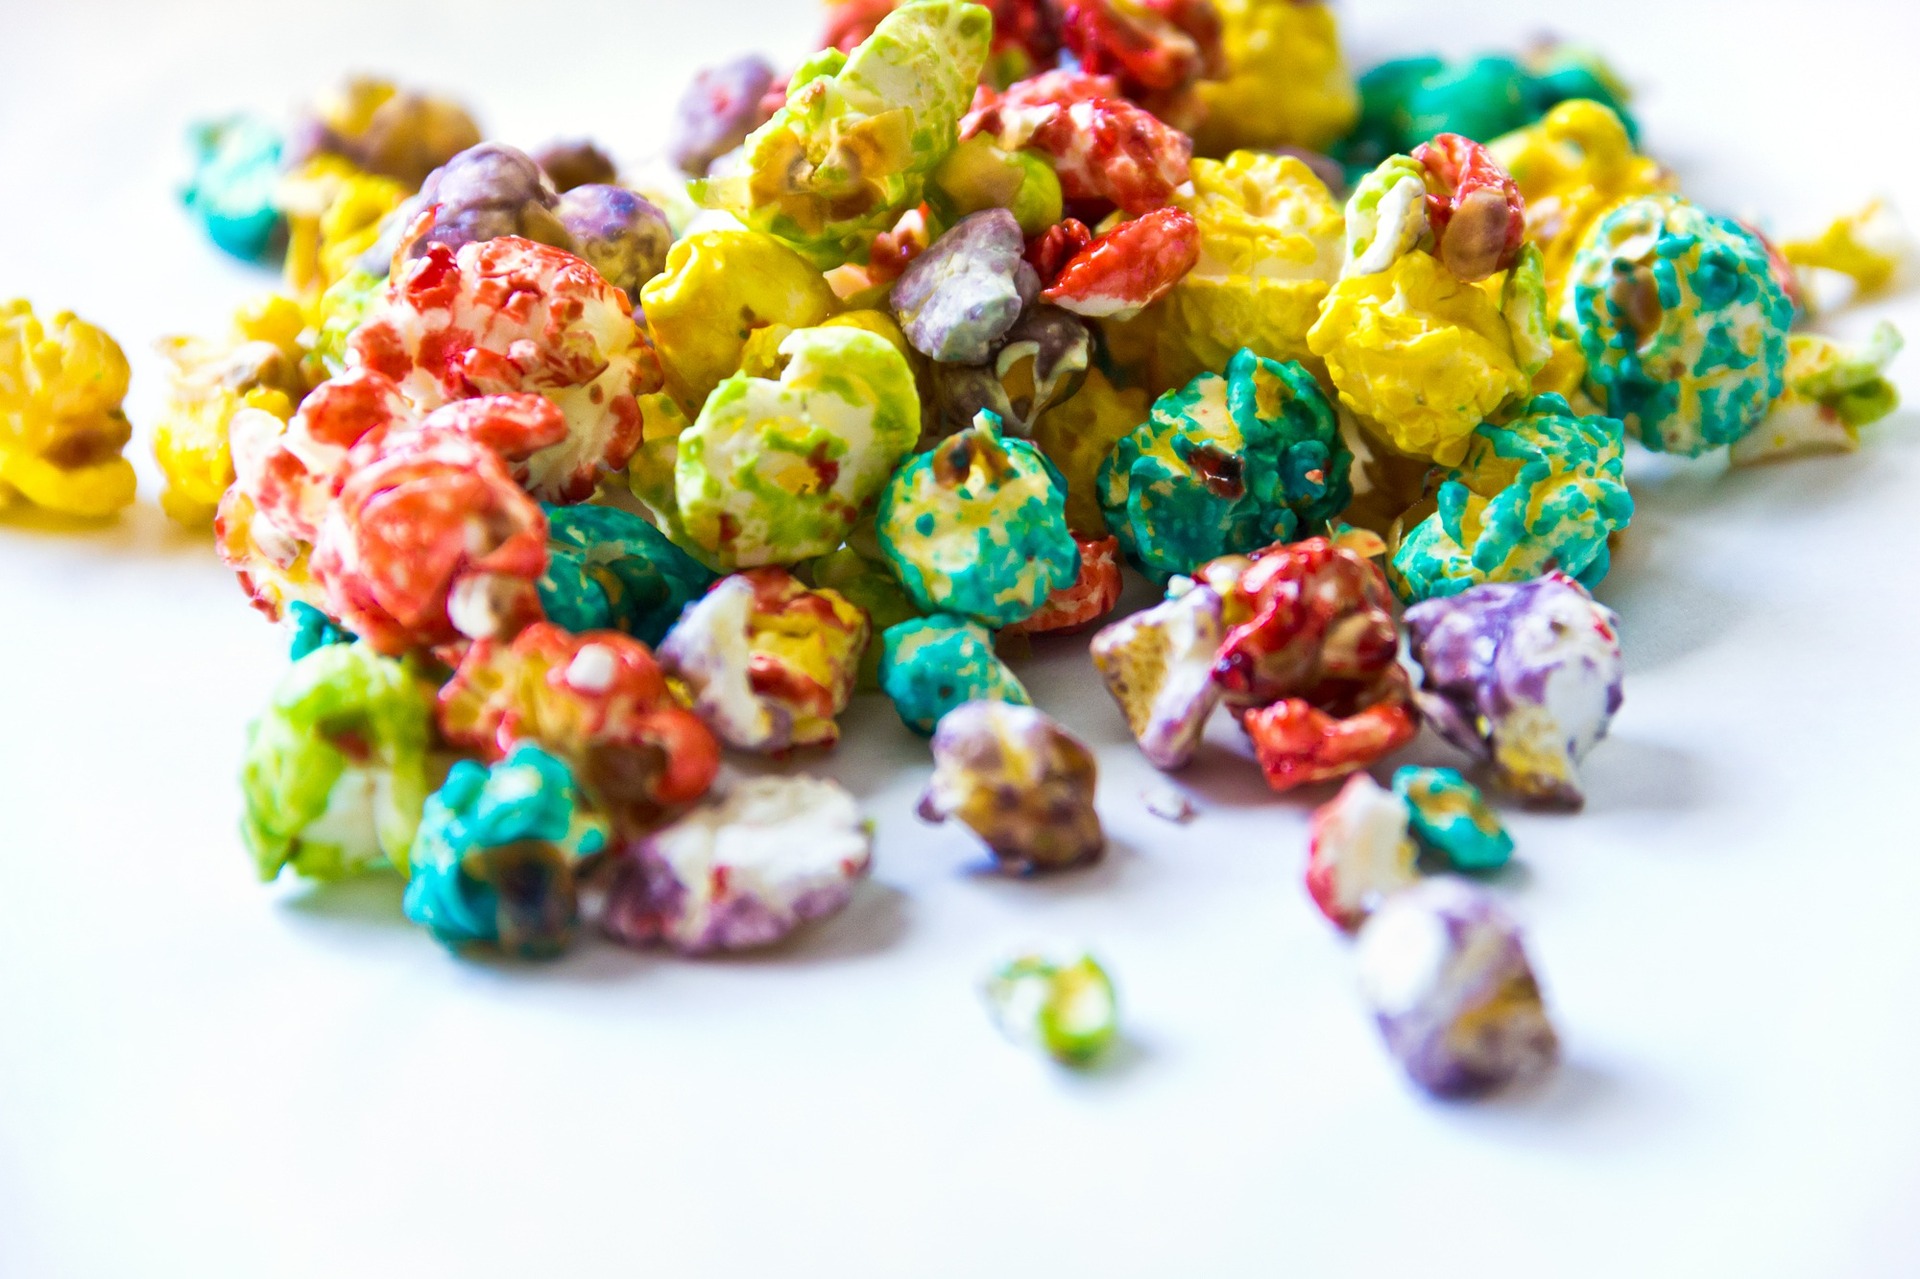 How to Make Colorful Flavored Popcorn - The Green Eyed Lady Blog